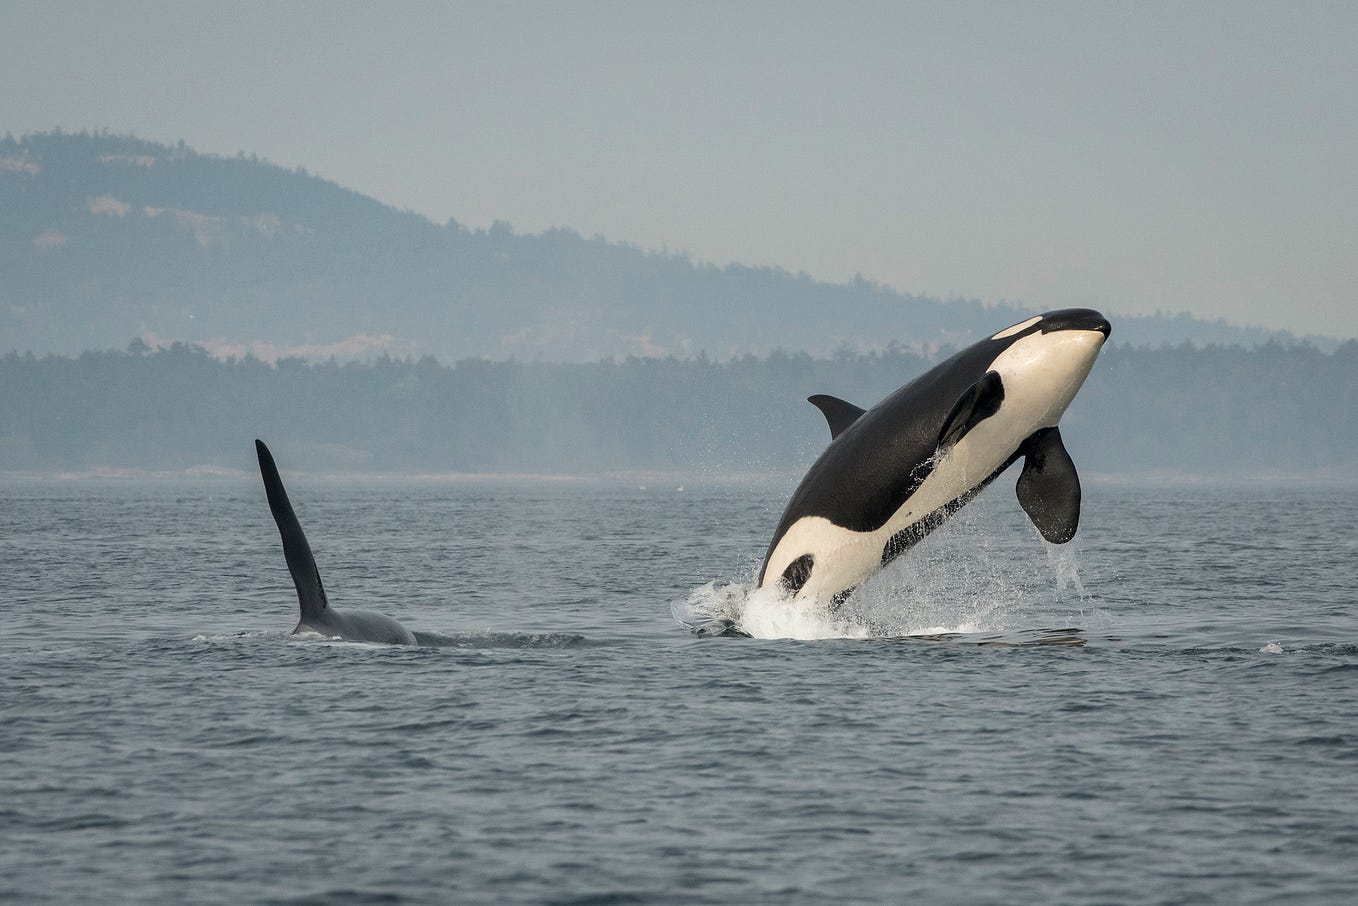 Photo of J16 Southern Resident orca breaching while J26 swims nearby. Photo from Katy Foster/ NOAA Fisheres.